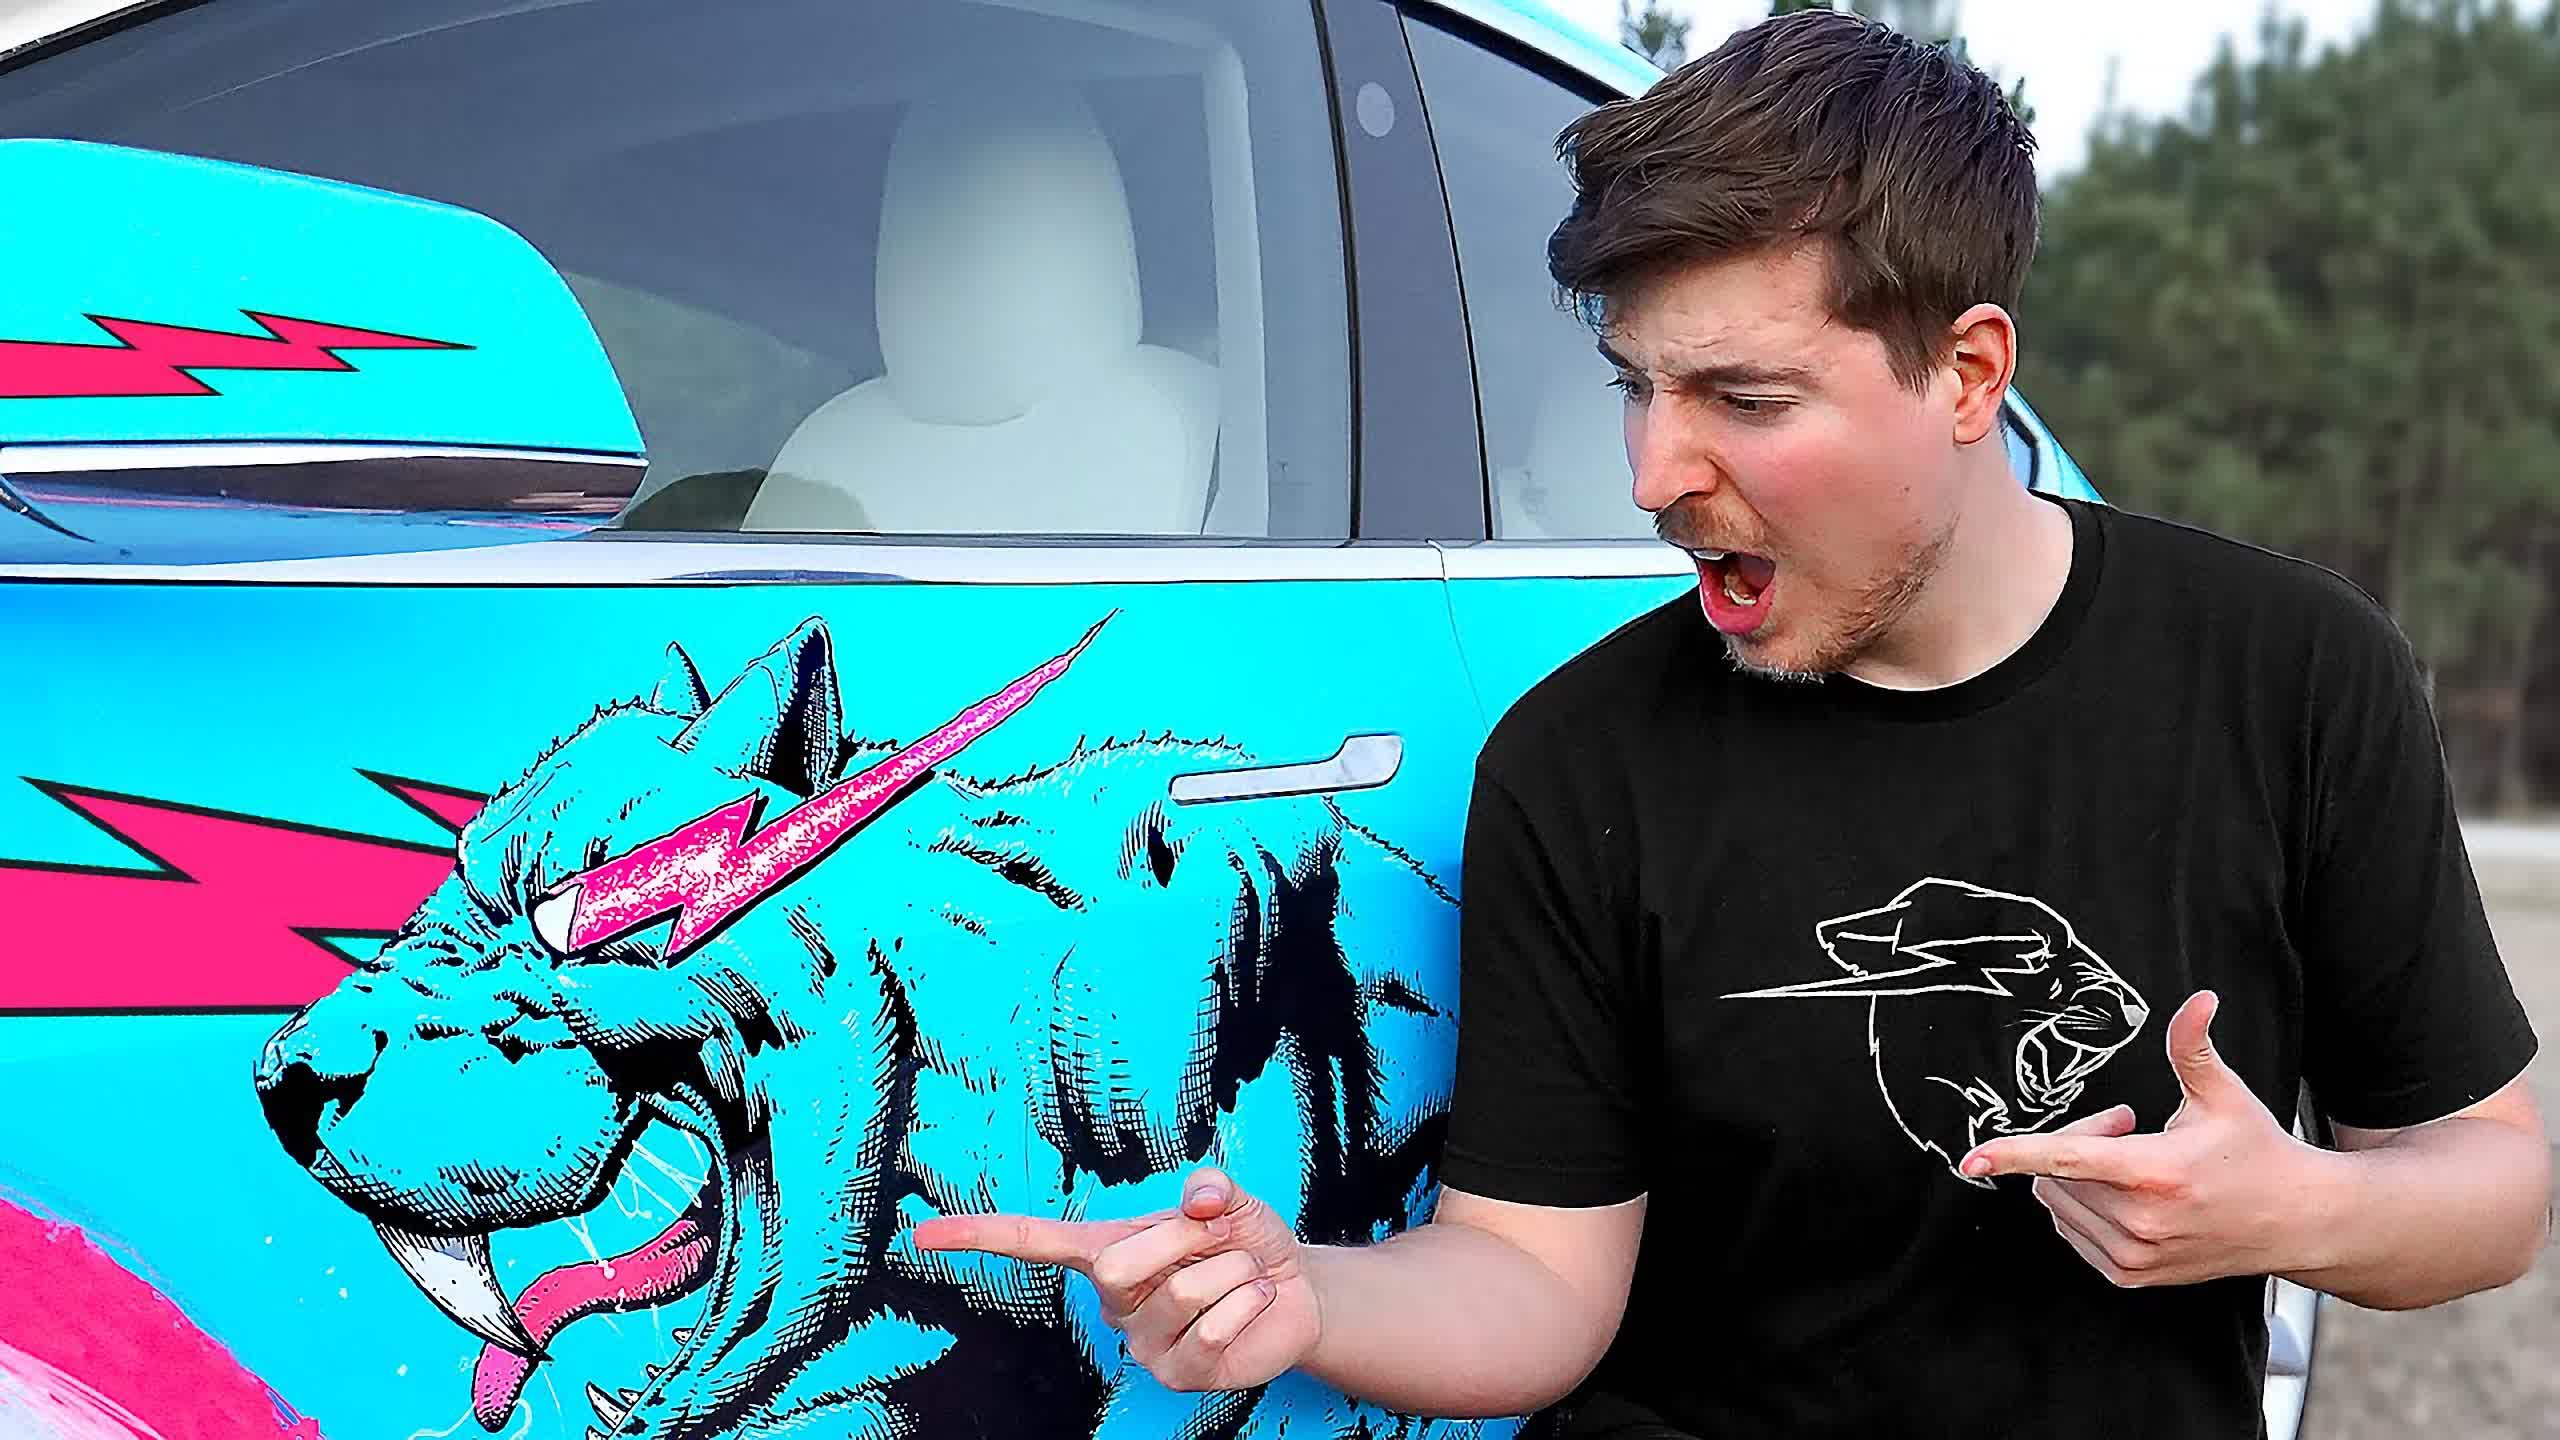 MrBeast leads the top 10 highest-paid YouTubers of 2021 with $54 million